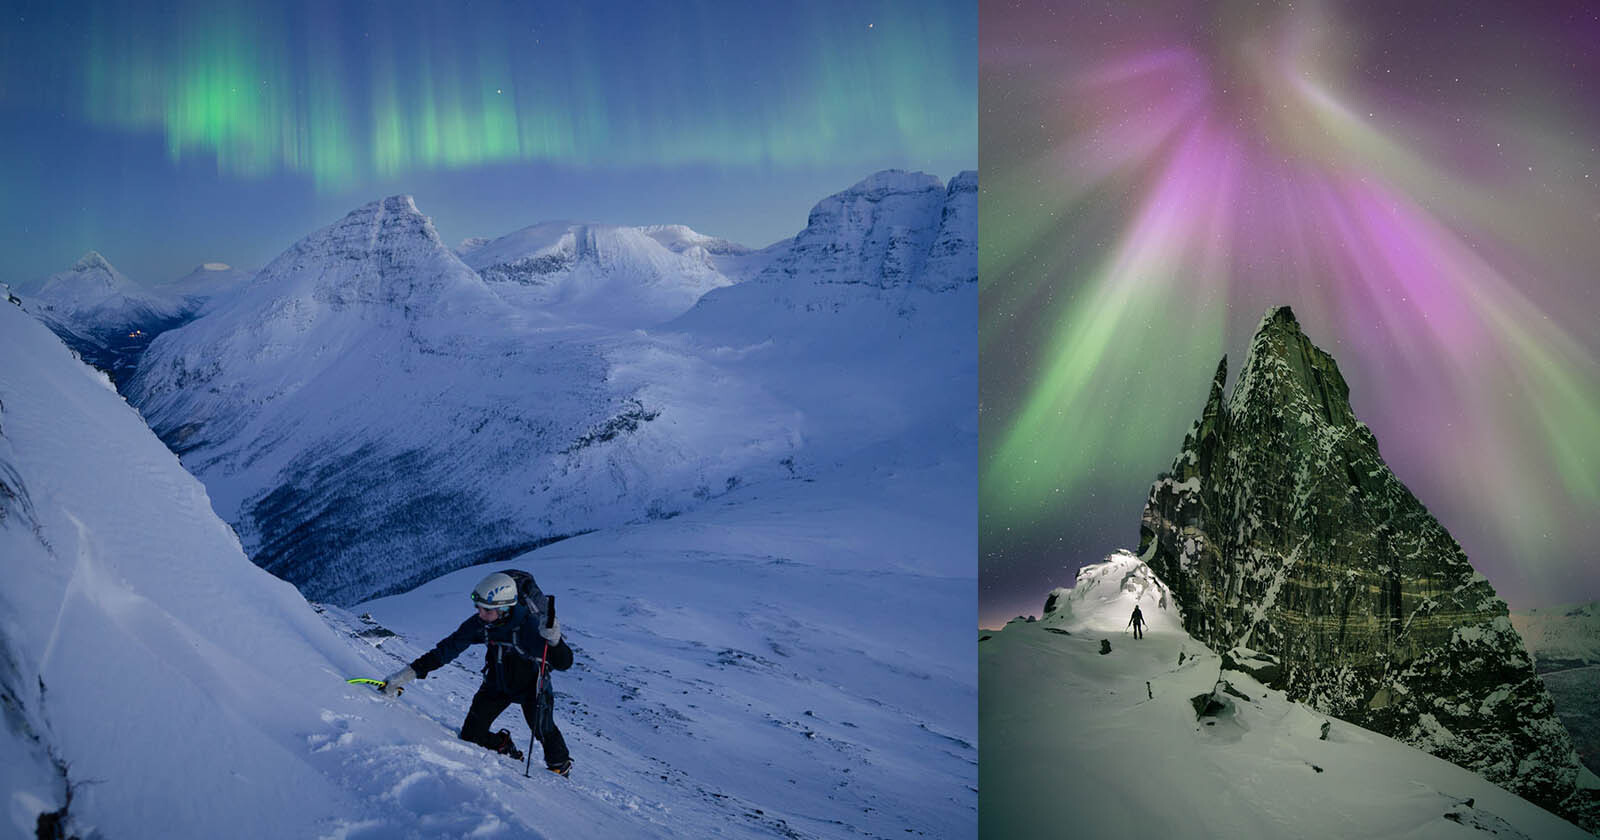 How We Climbed an Iconic Norwegian Mountain for an Epic Aurora Photo